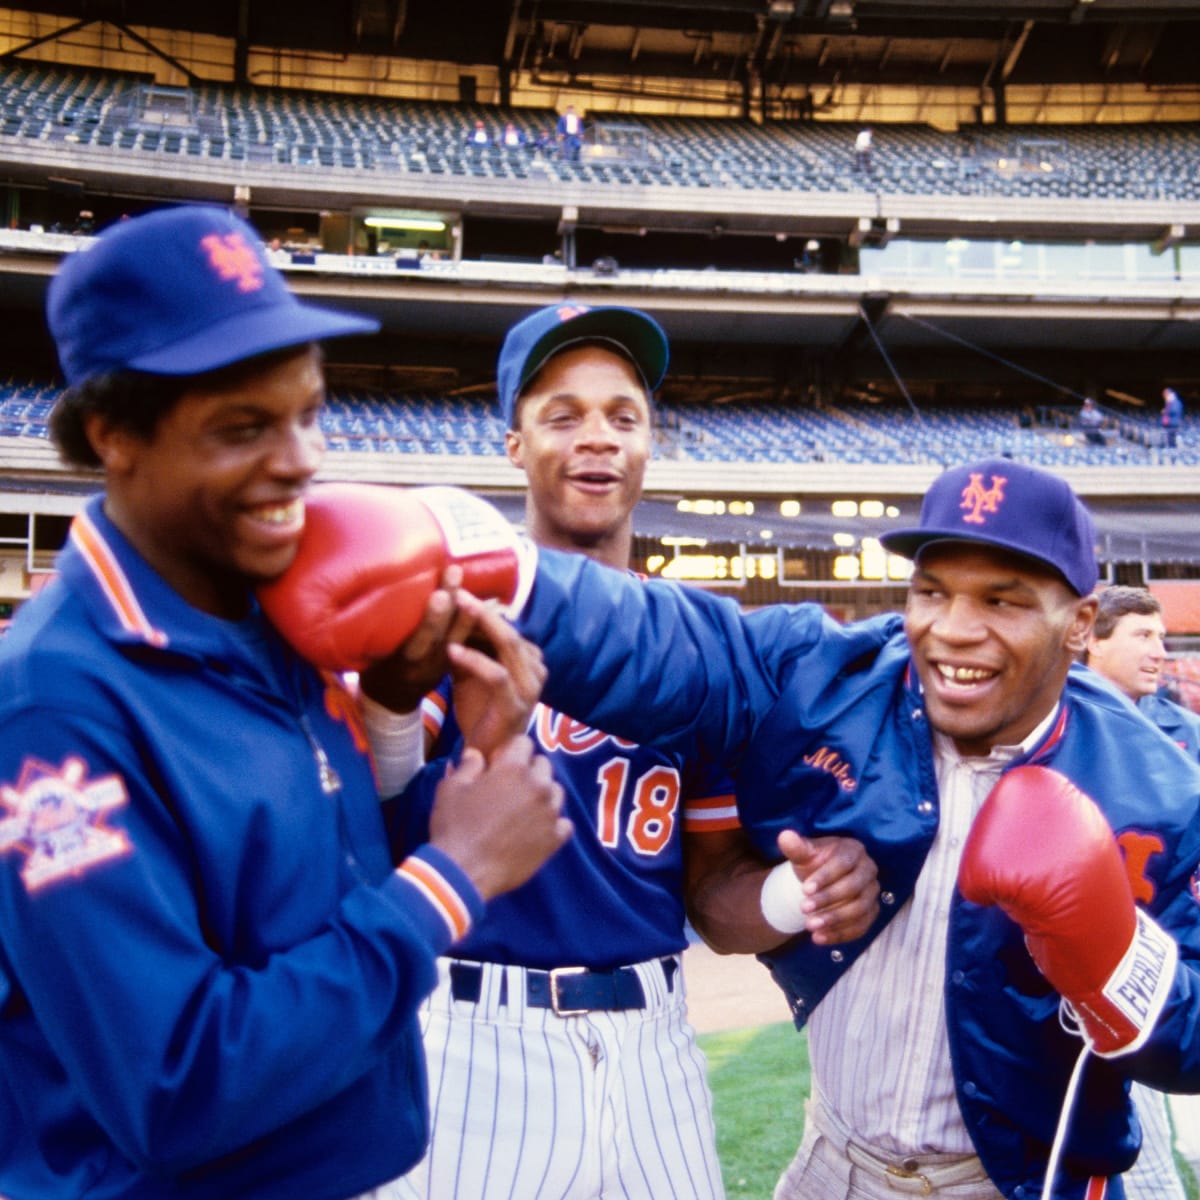 Mets Mount Rushmore: Are Darryl Strawberry and Dwight Gooden still there?